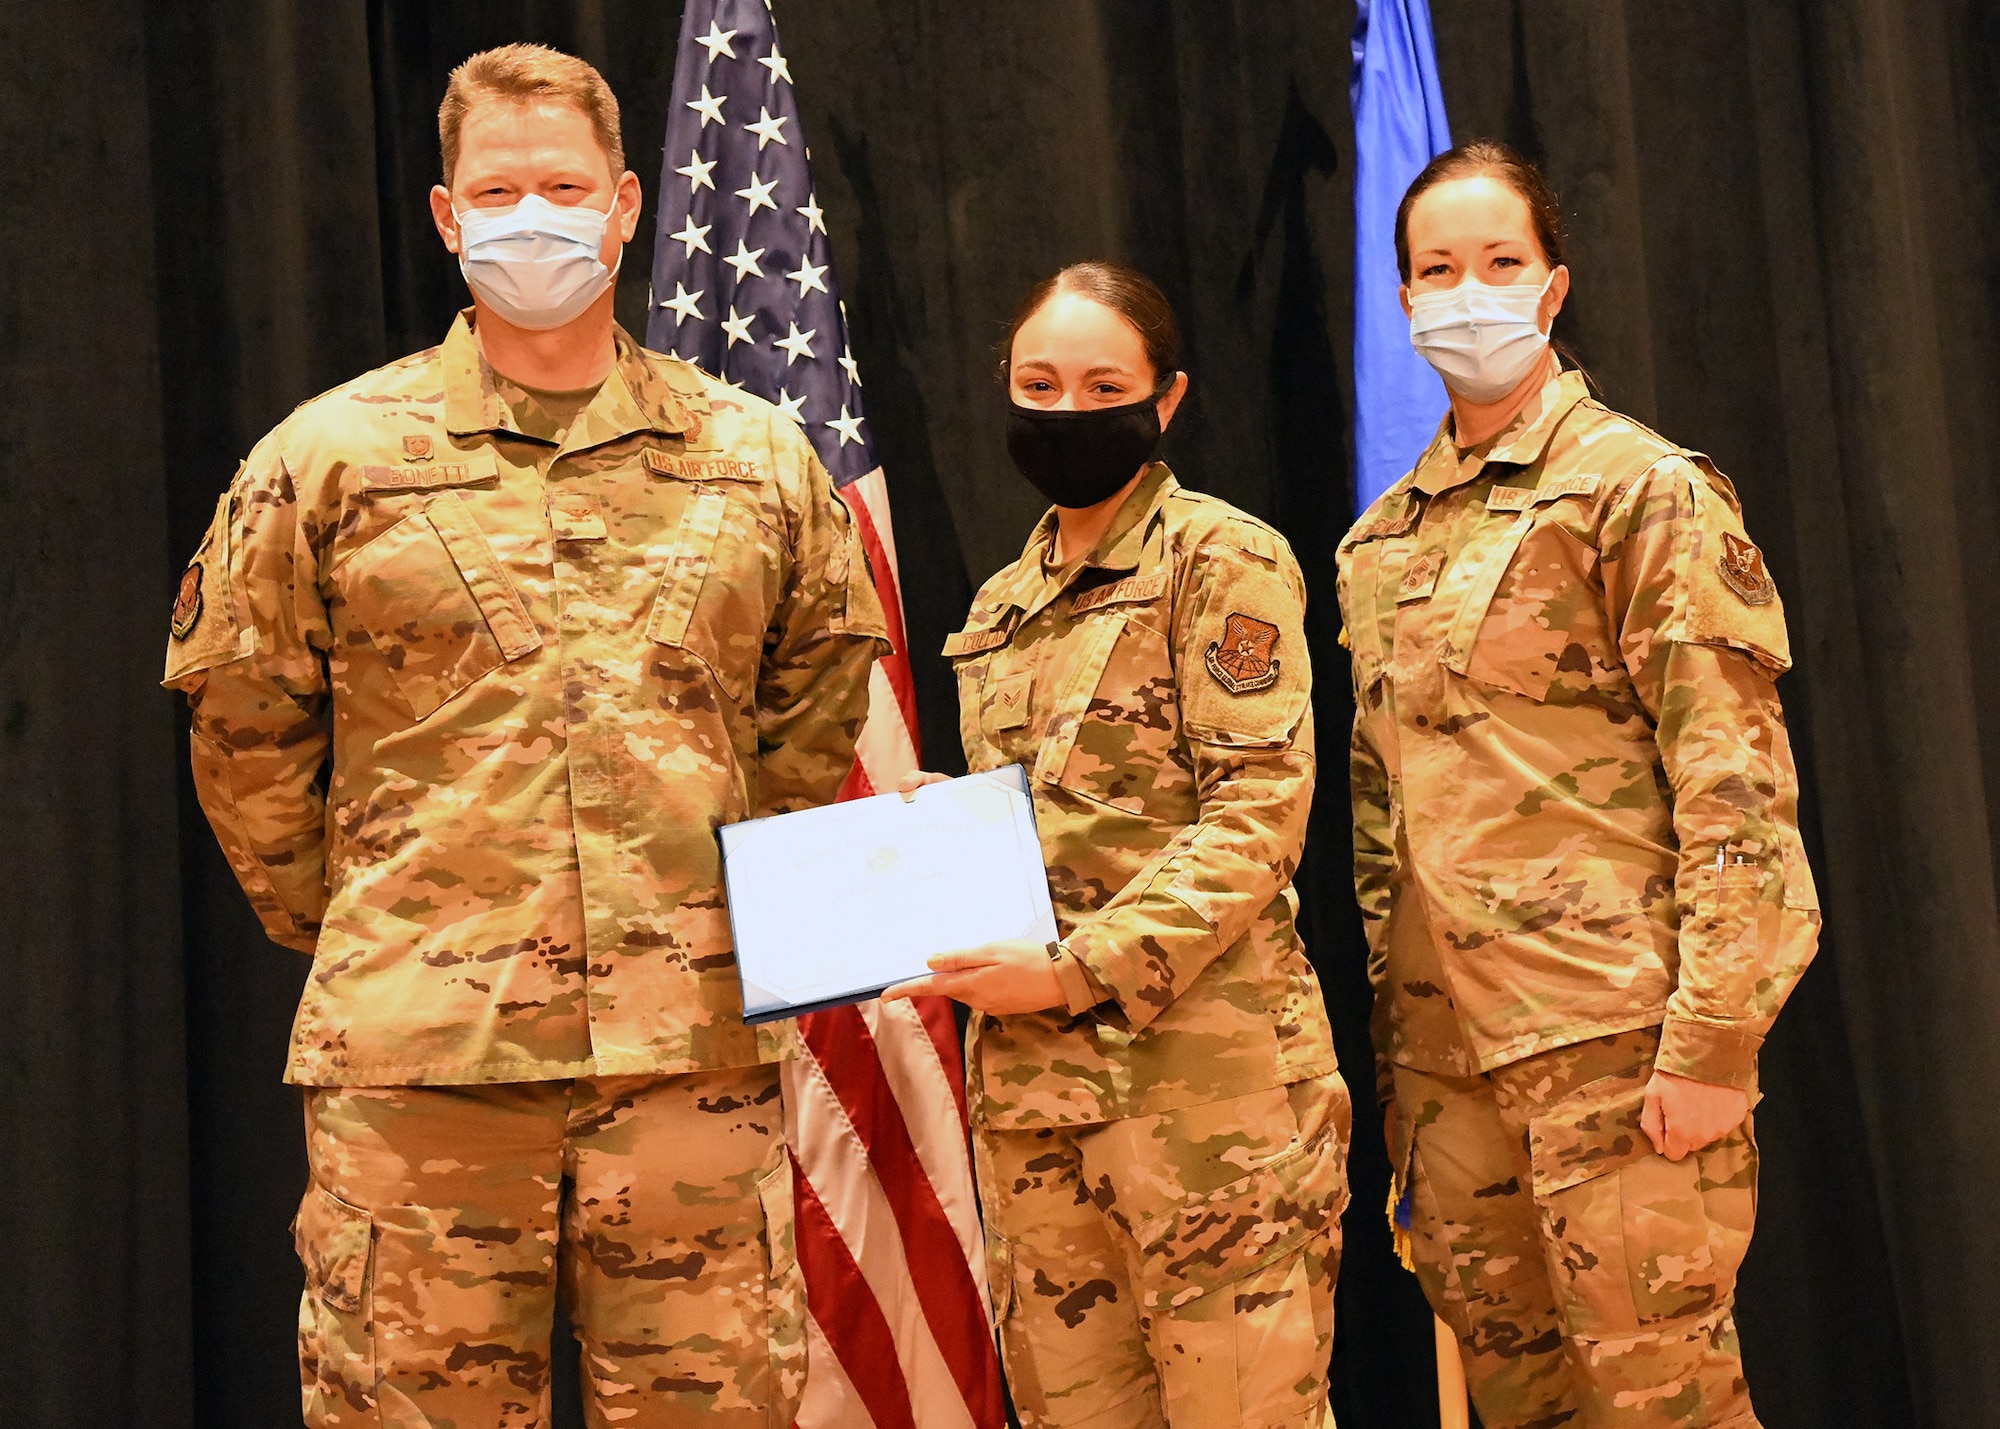 Colonel Peter Bonetti, 90th Missile Wing Commander, and Command Chief Master Sgt. Tiffany Bettisworth, present an Airman Leadership School graduate with a certificate Nov. 5 at the Base Theater on F. E. Warren Air Force Base, Wyo.